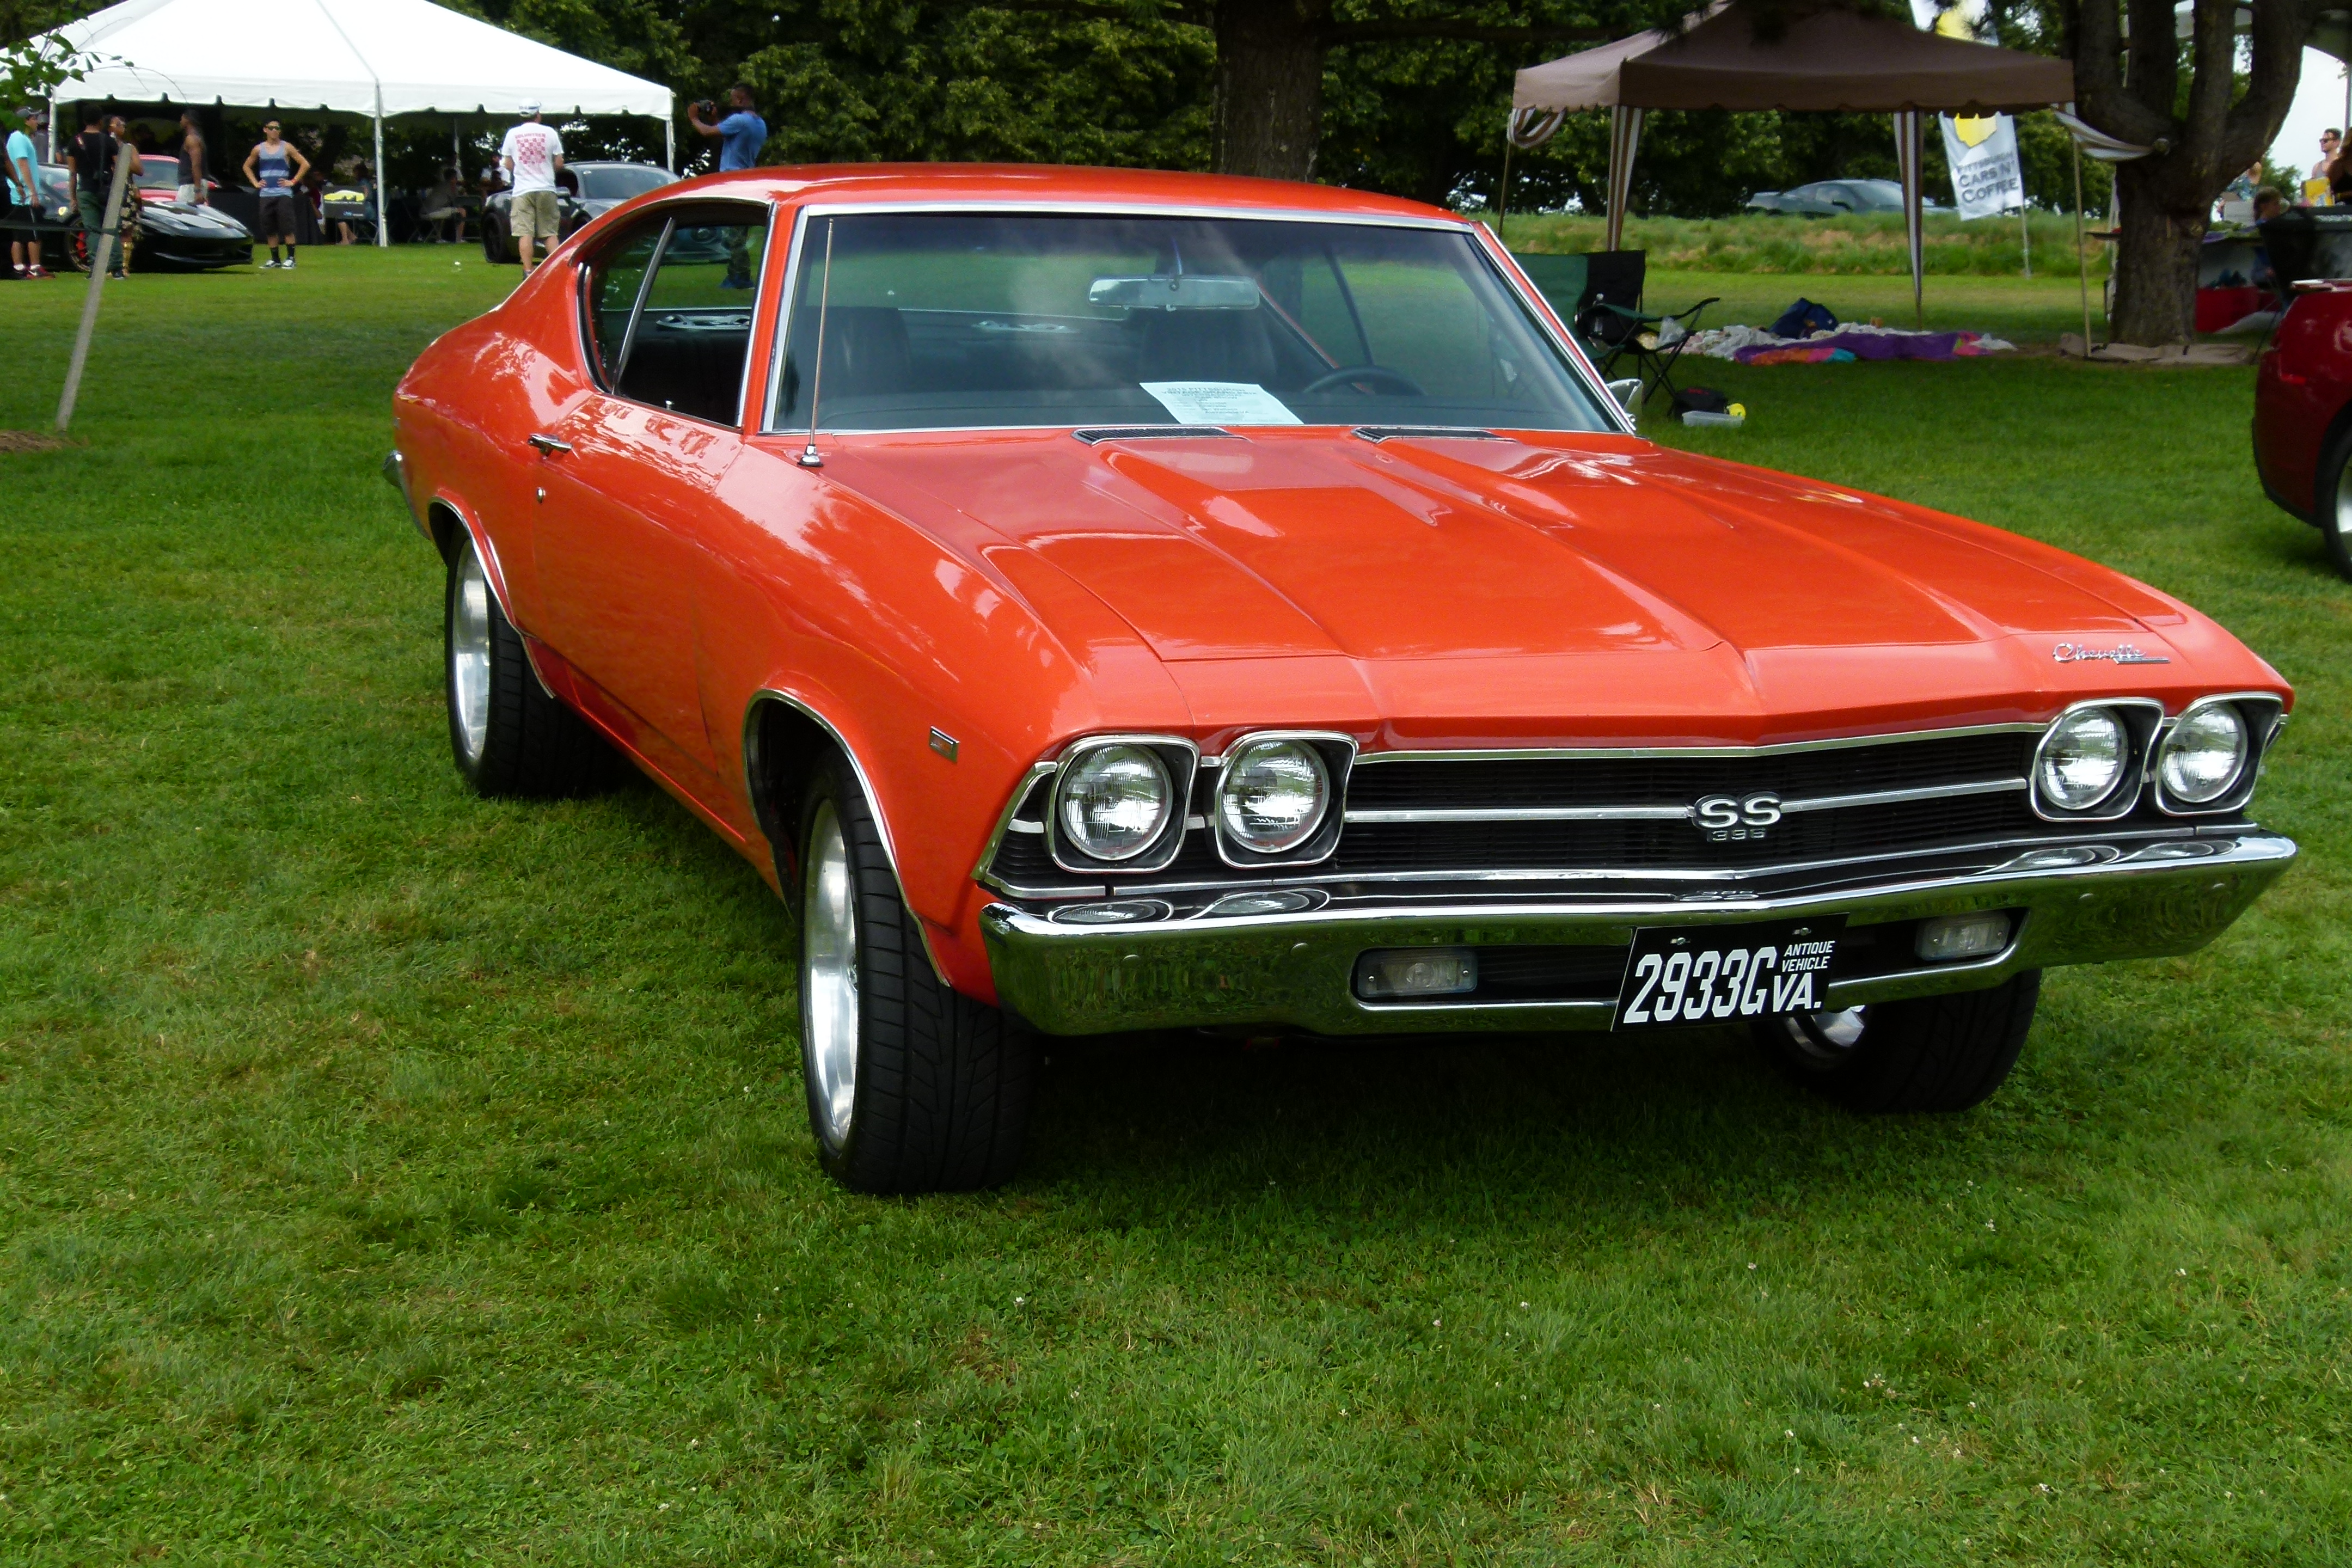 American cars were proudly on display, such as this Chevrolet Chevelle SS.